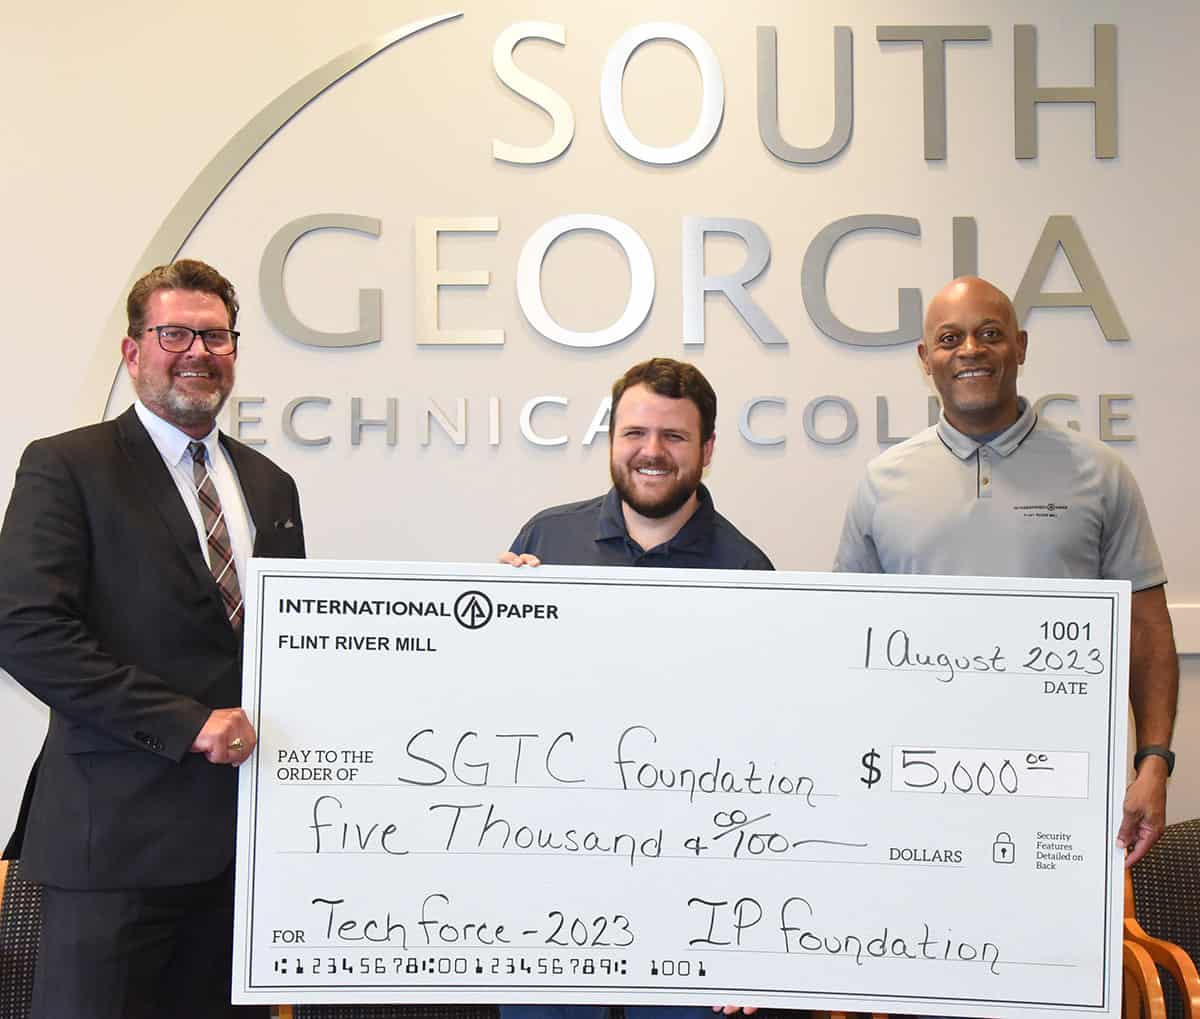 South Georgia Technical College President Dr. John Watford is shown above receiving a grant donation from International Paper Flint River Mill from IP Flint River Mill Communications Coordinator Caleb Mims and IP Flint River Mill Manager John Nixon.